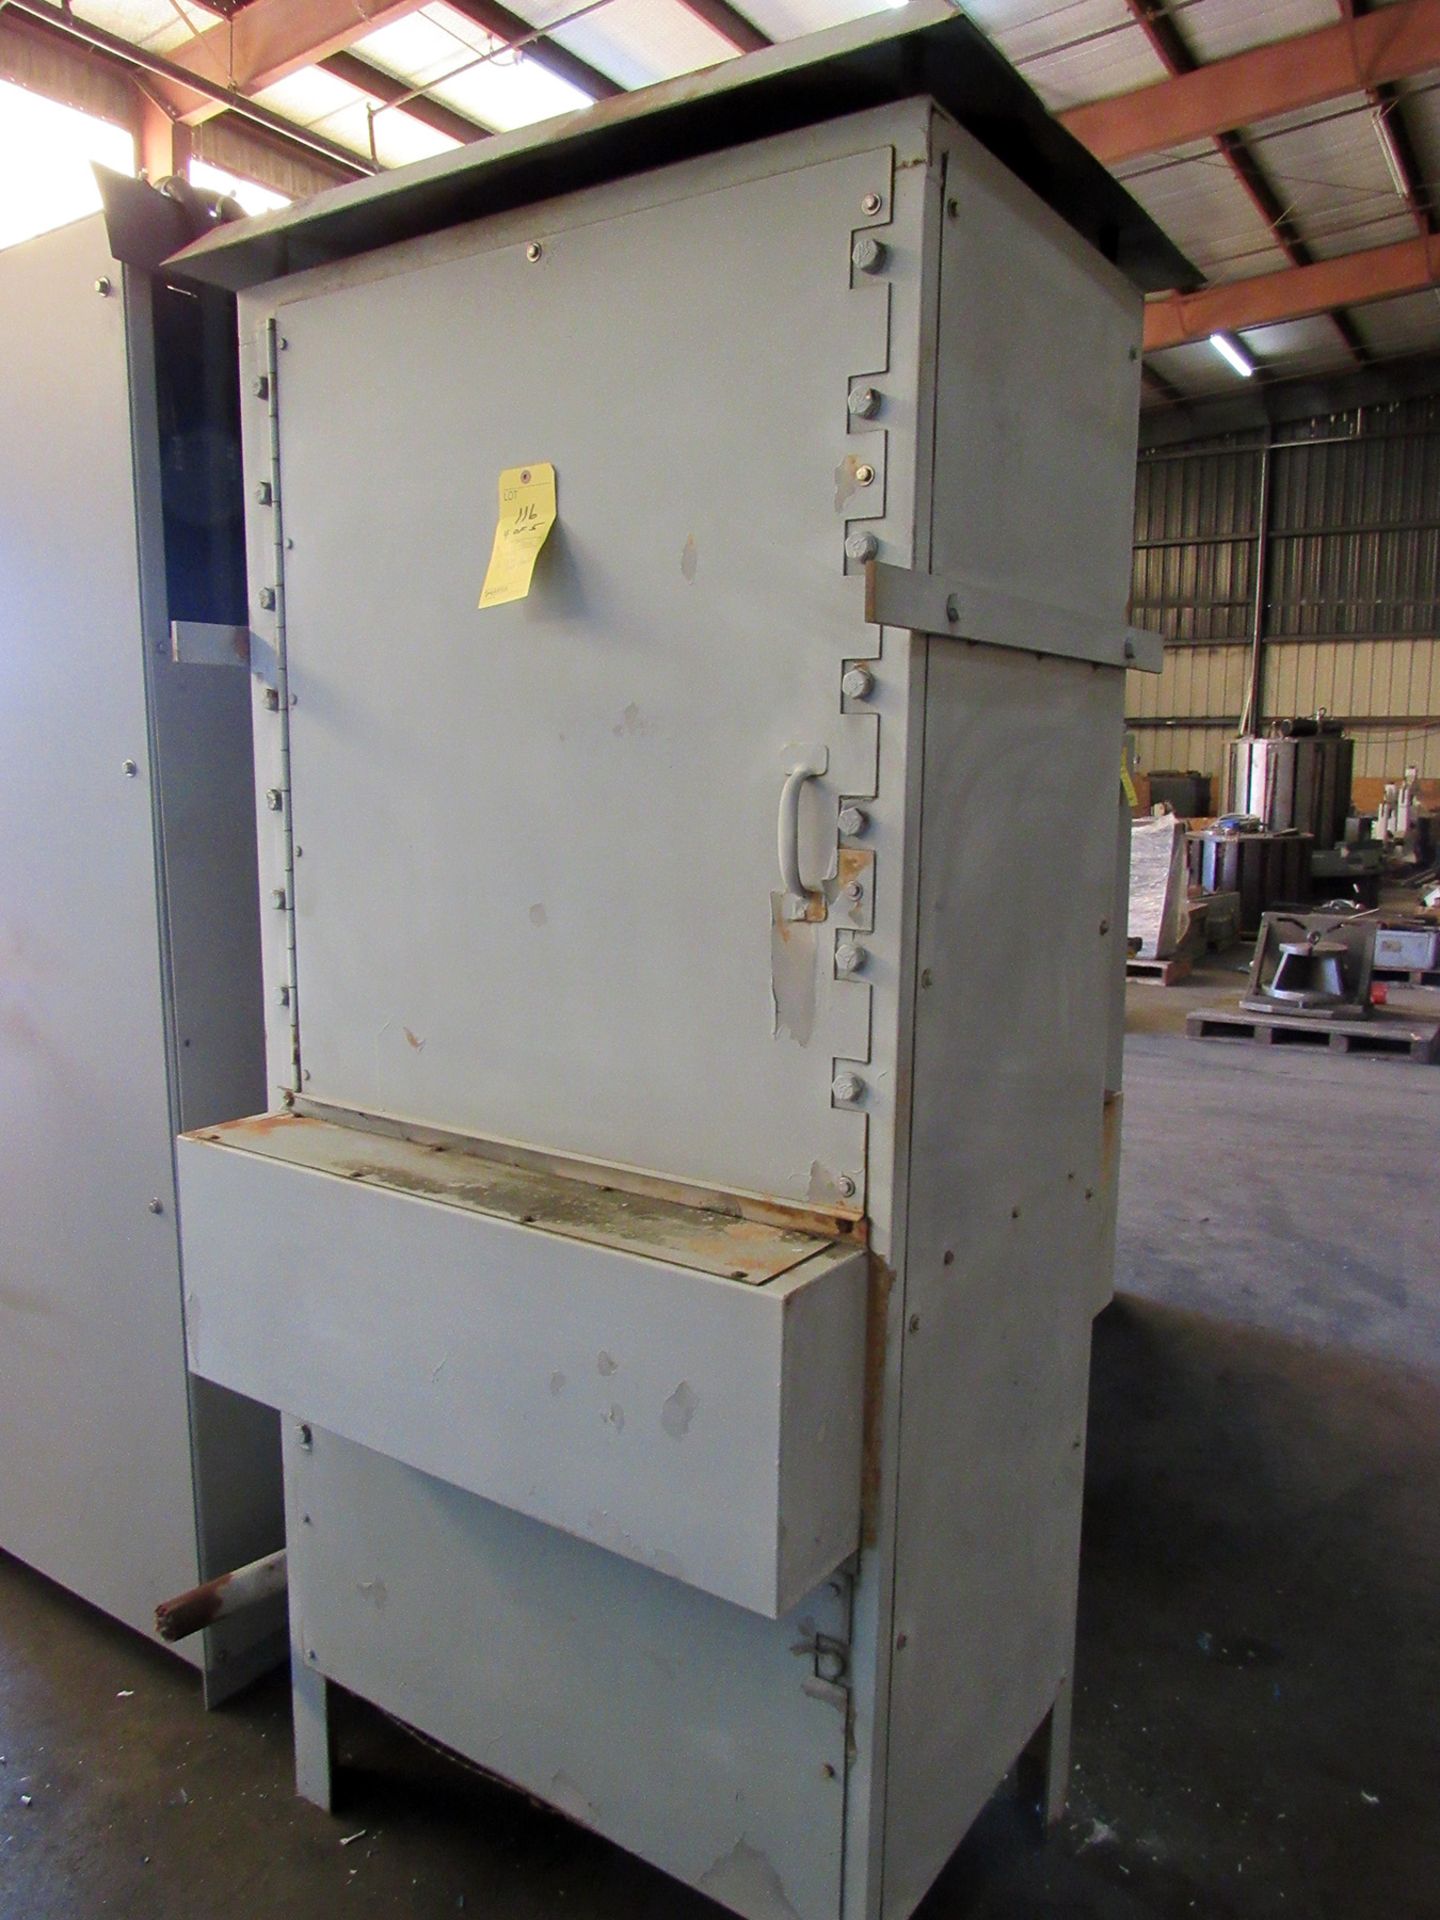 1250 KW Avitron Model K575A Outdoor Resistive Load Bank with Switch Gear - Image 5 of 11